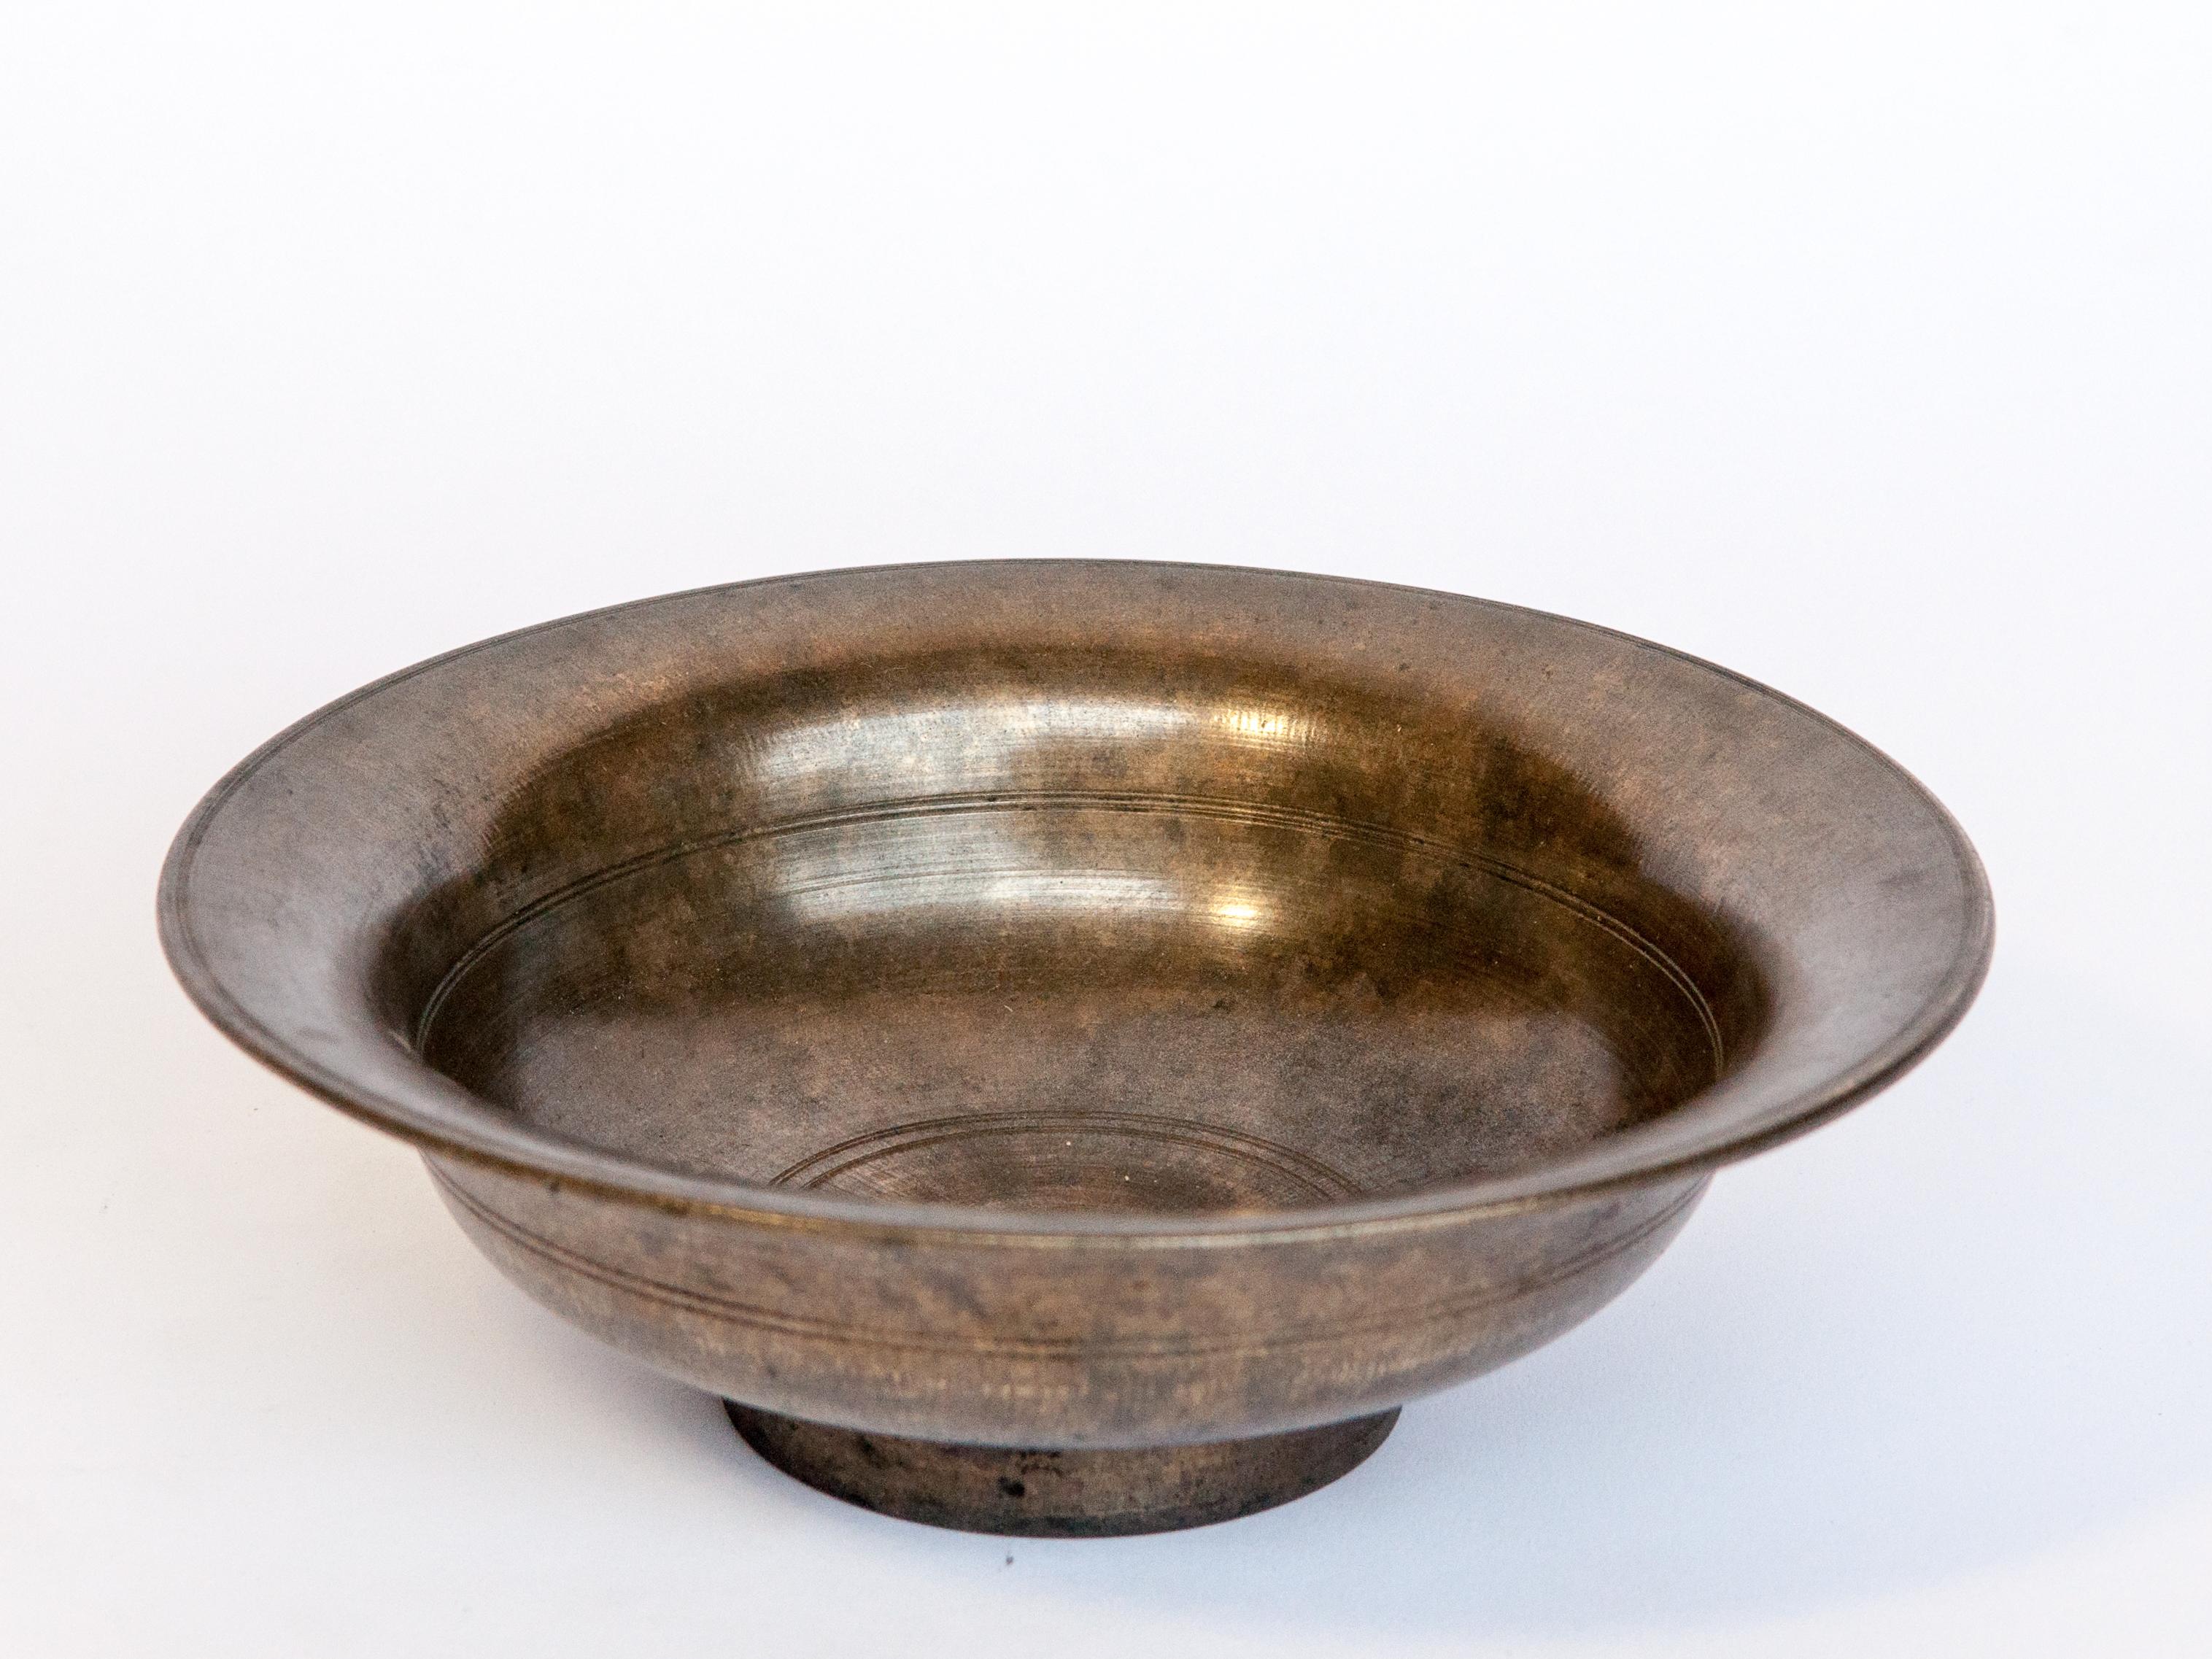 Vintage Tibetan / Nepali Tsampa bowl, bronze. From Nepal, early to mid-20th century.
This bowl come from the highlands of Nepal, along the Tibetan Nepal border where is would have been used as a food bowl for tsampa, a roasted barley flour. This